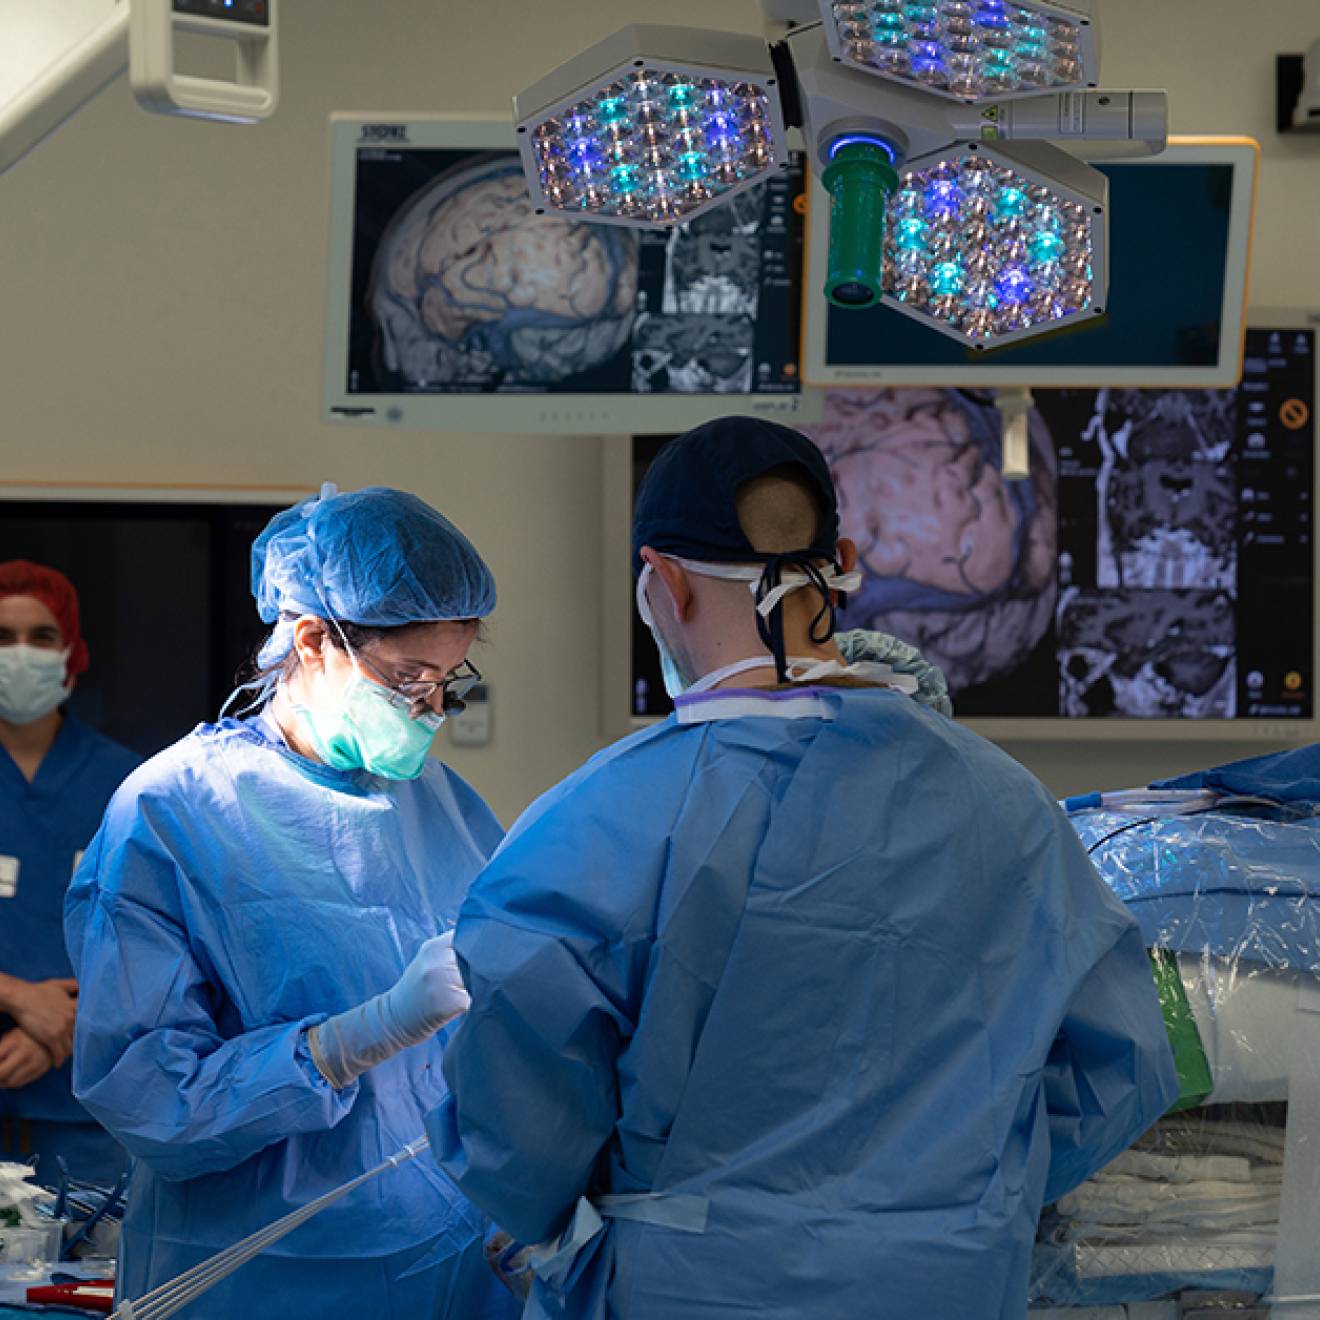 Surgeons operating in an operating room with brain scans hanging around the theater